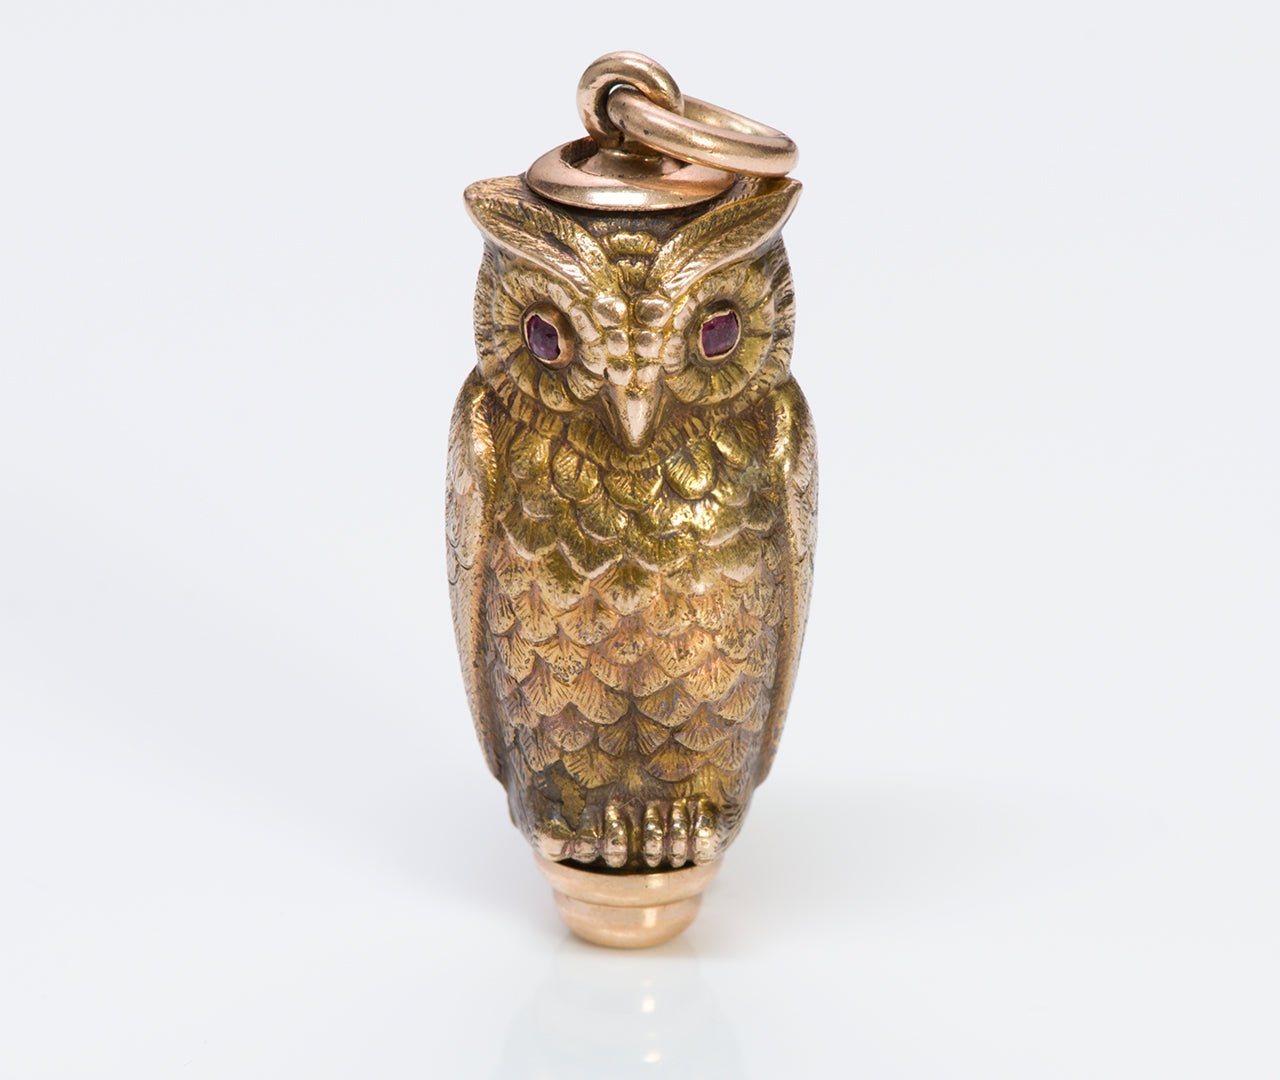 Antique Gold & Ruby Owl Fob Mechanical Pencil